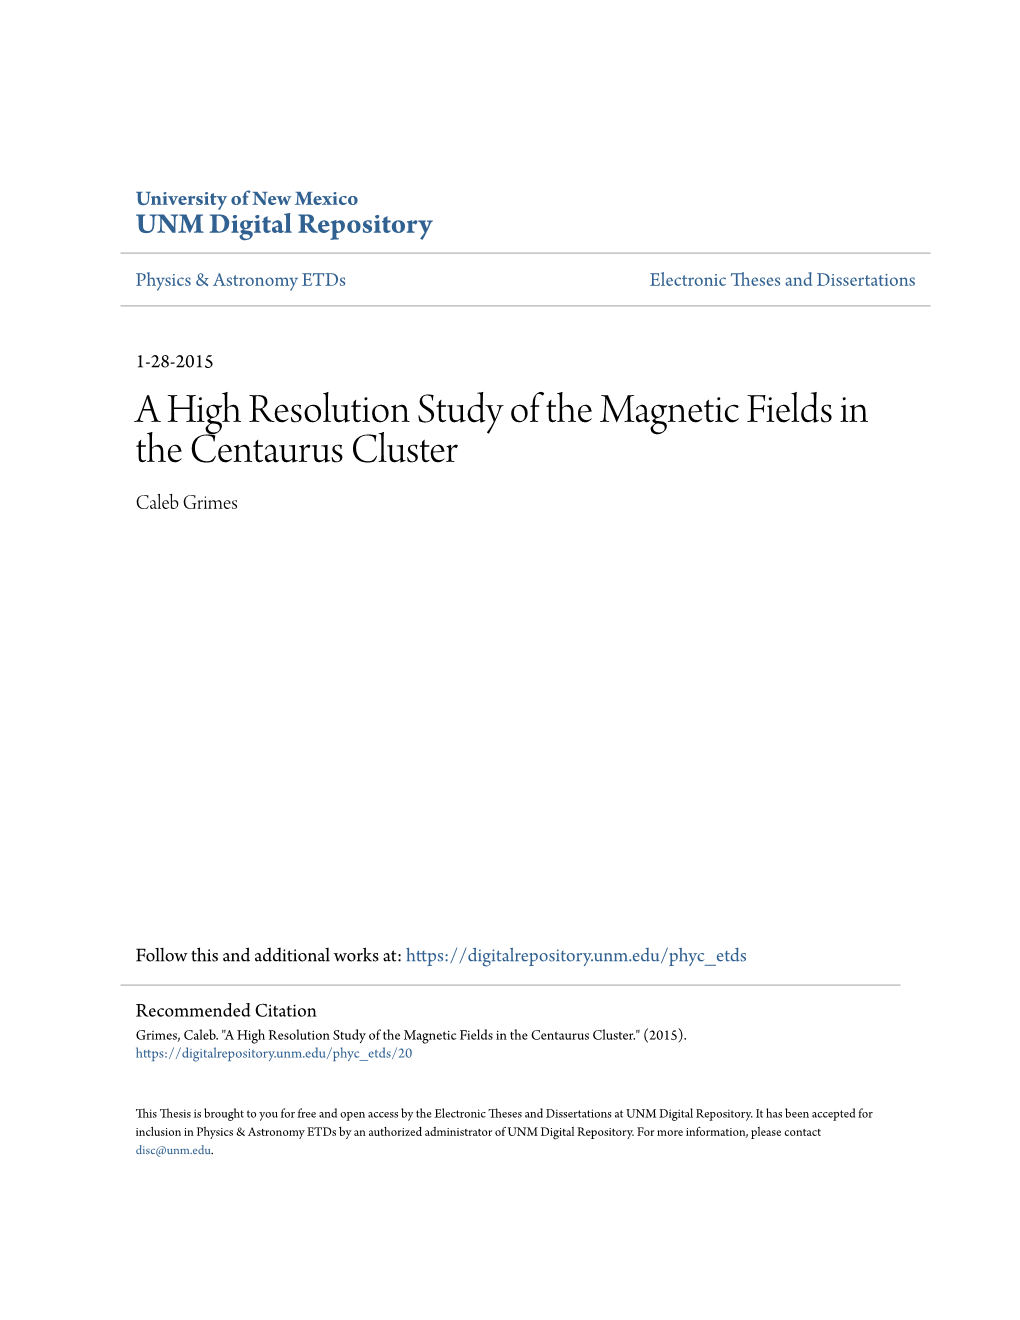 A High Resolution Study of the Magnetic Fields in the Centaurus Cluster Caleb Grimes